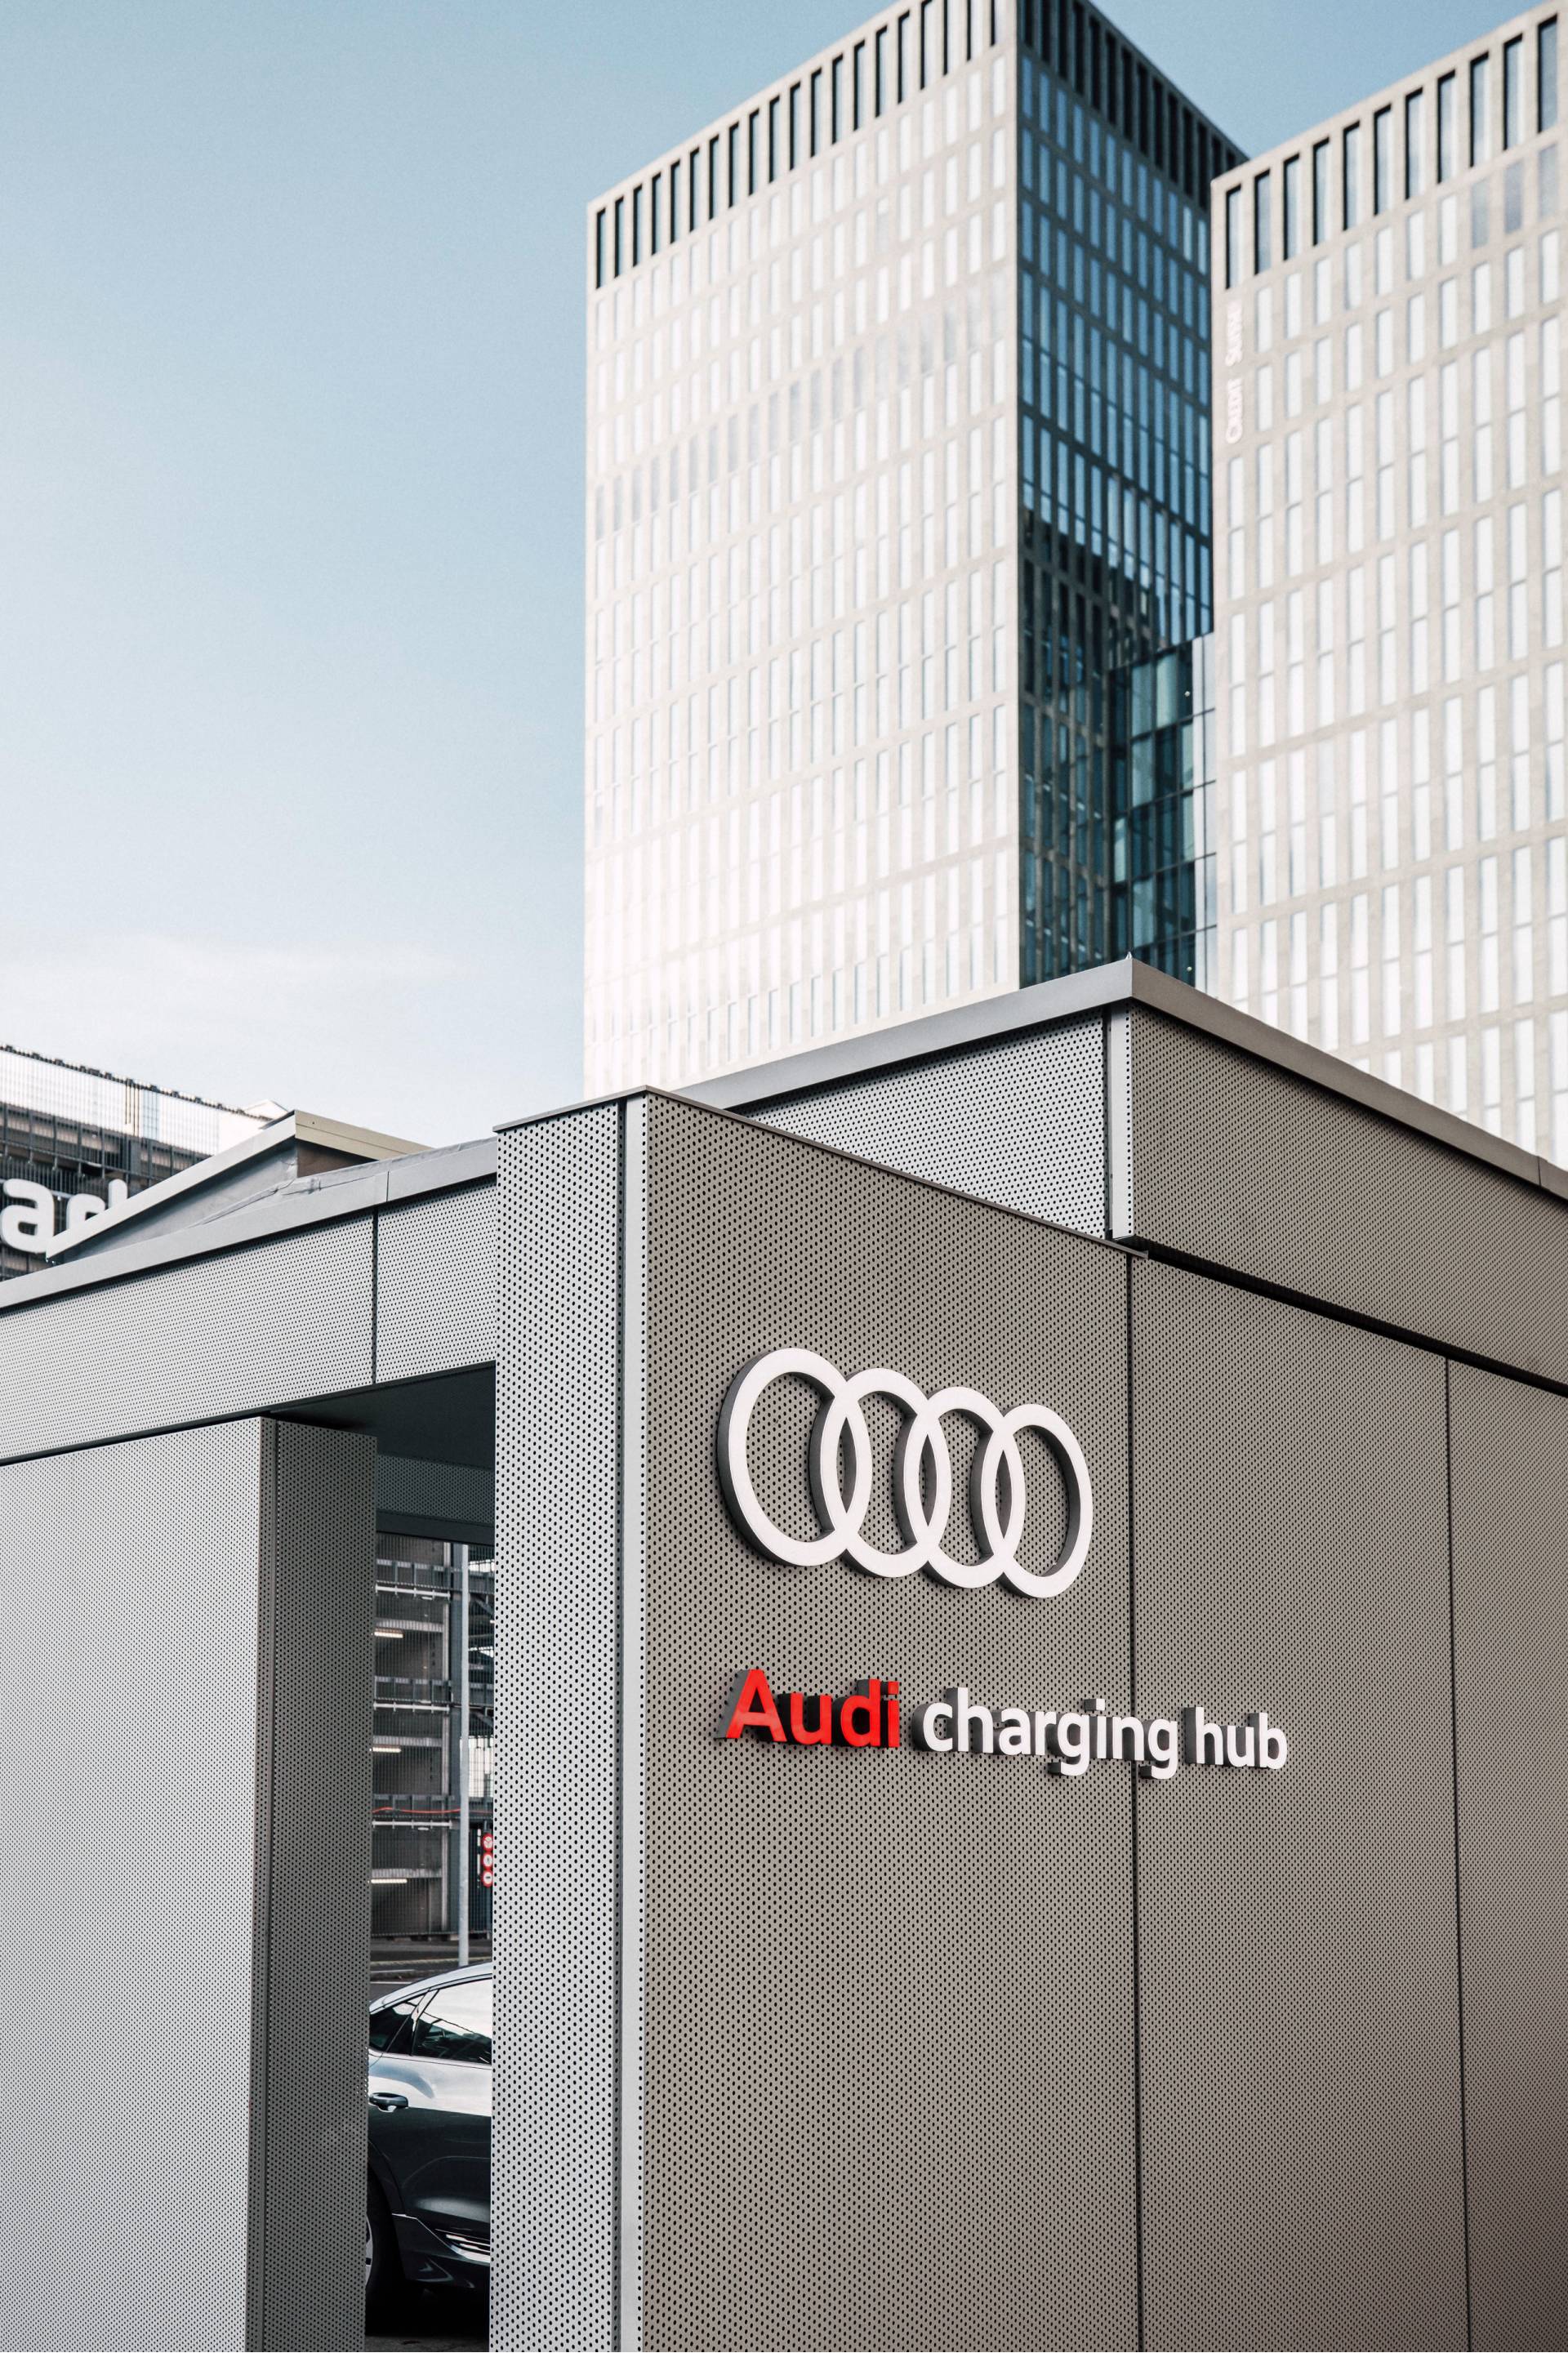 Audi charging hub, high-rise buildings in the background.